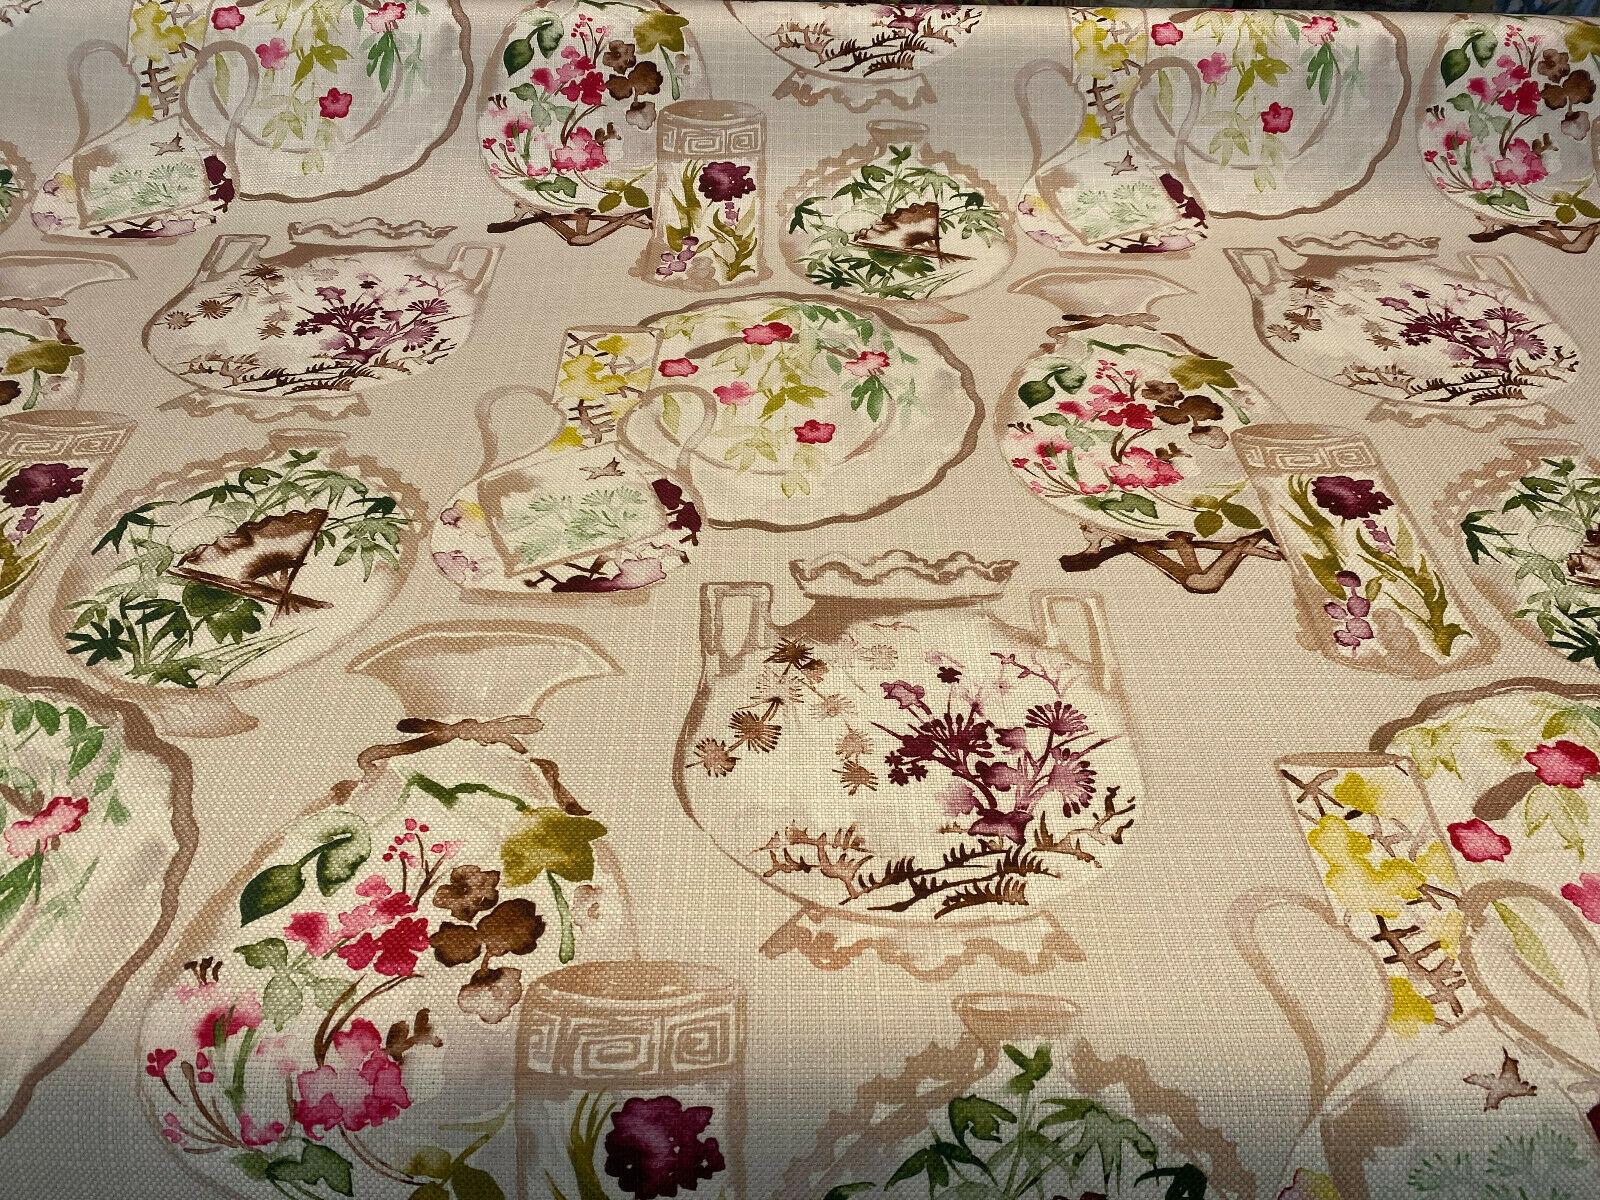 Gentza Floral Twine Antique Upholstery Fabric by the yard sofa chair